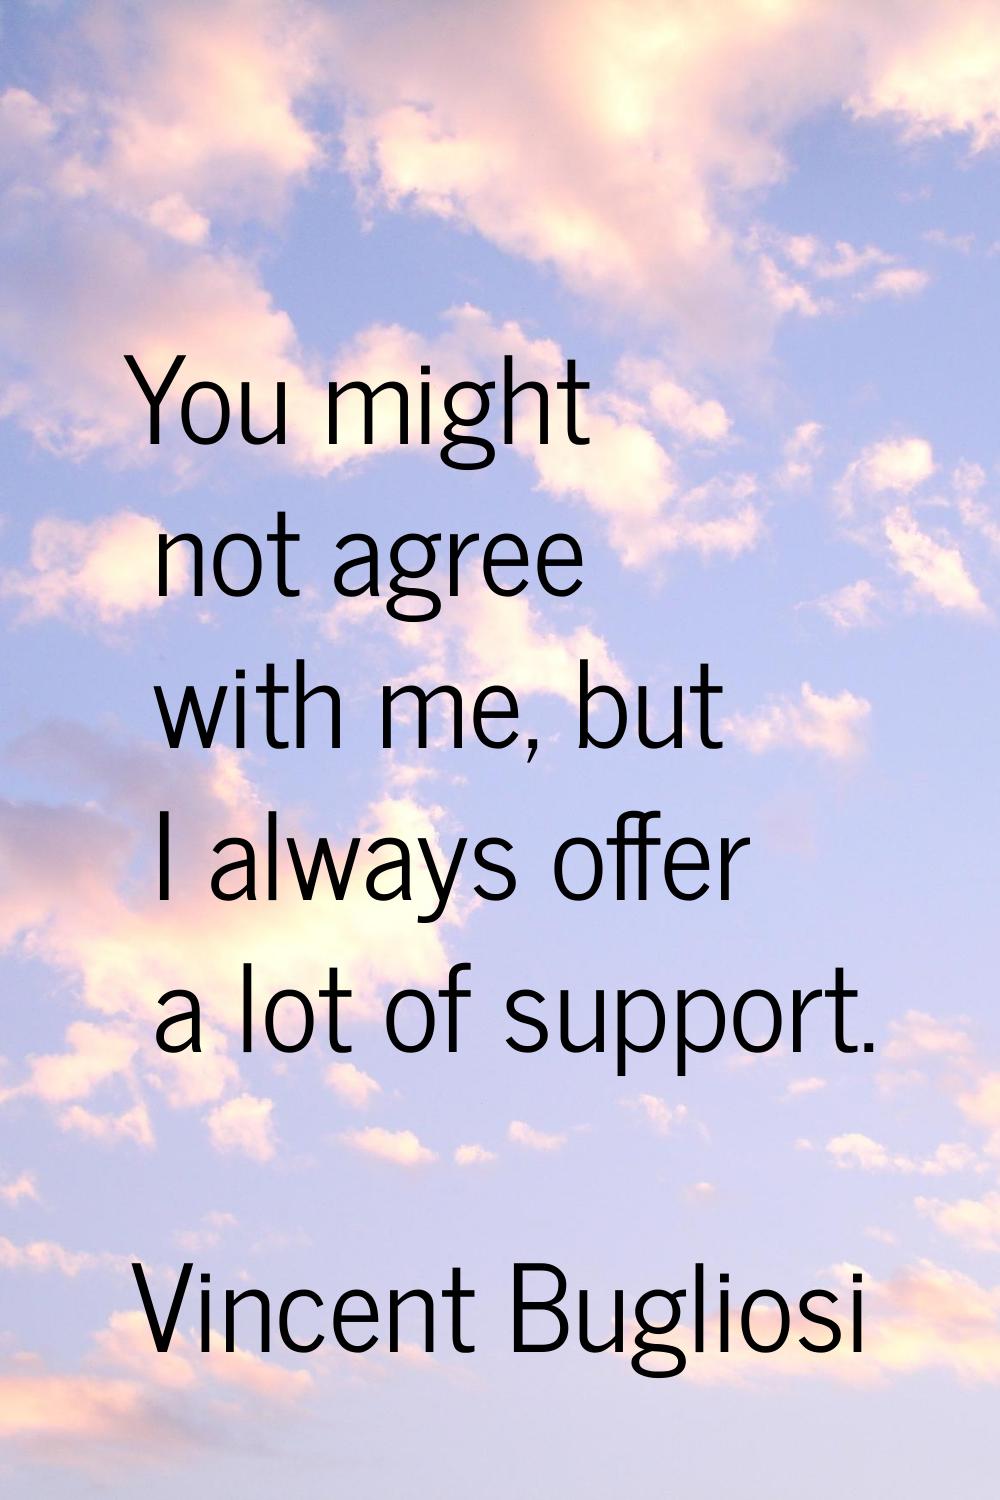 You might not agree with me, but I always offer a lot of support.